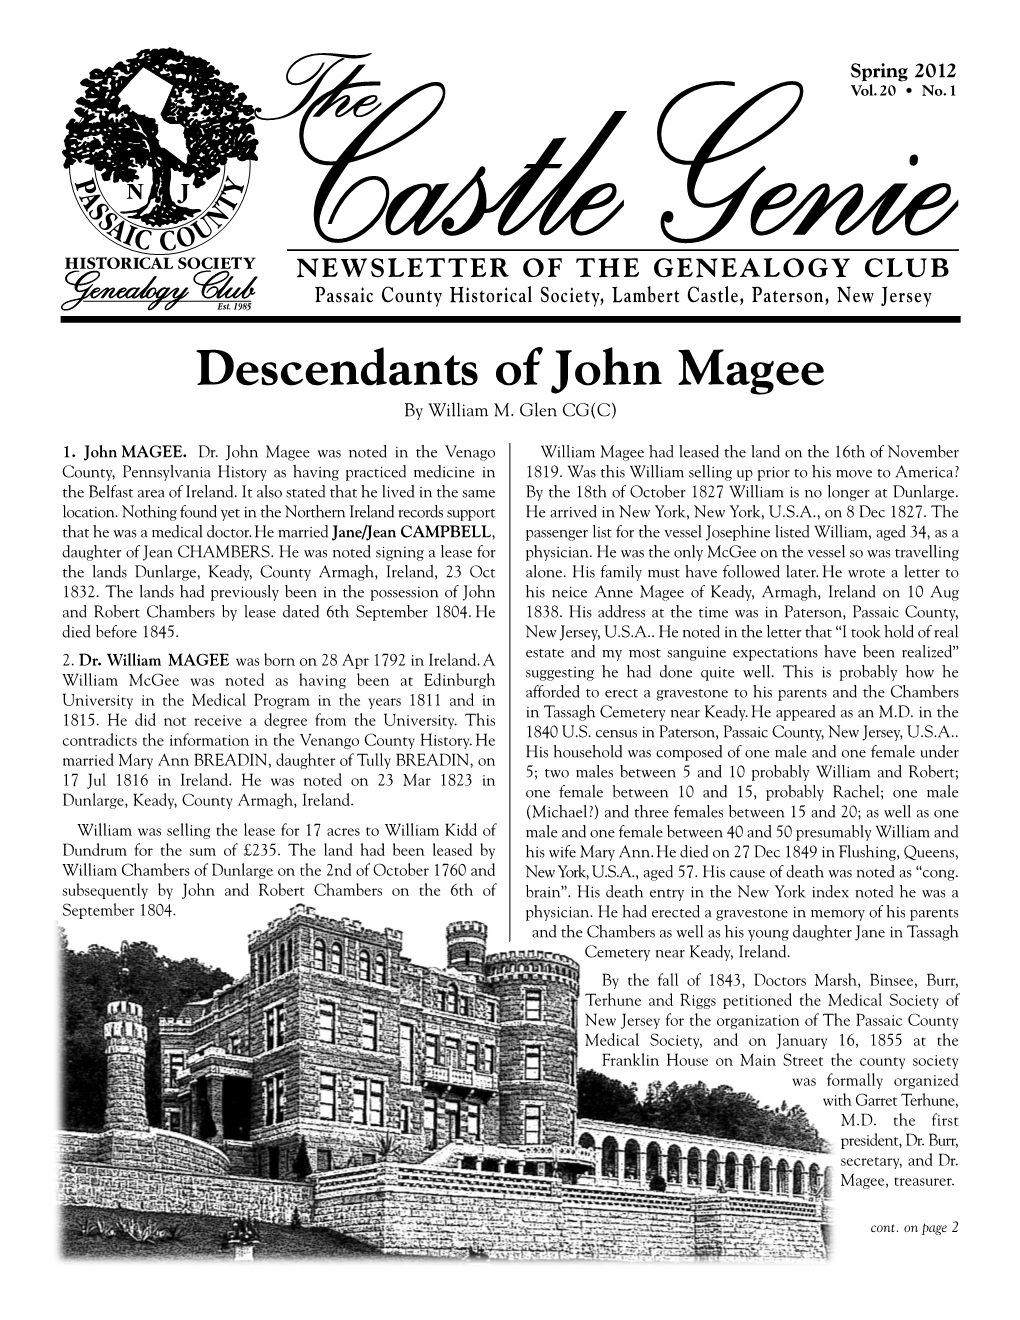 Descendants of John Magee by William M